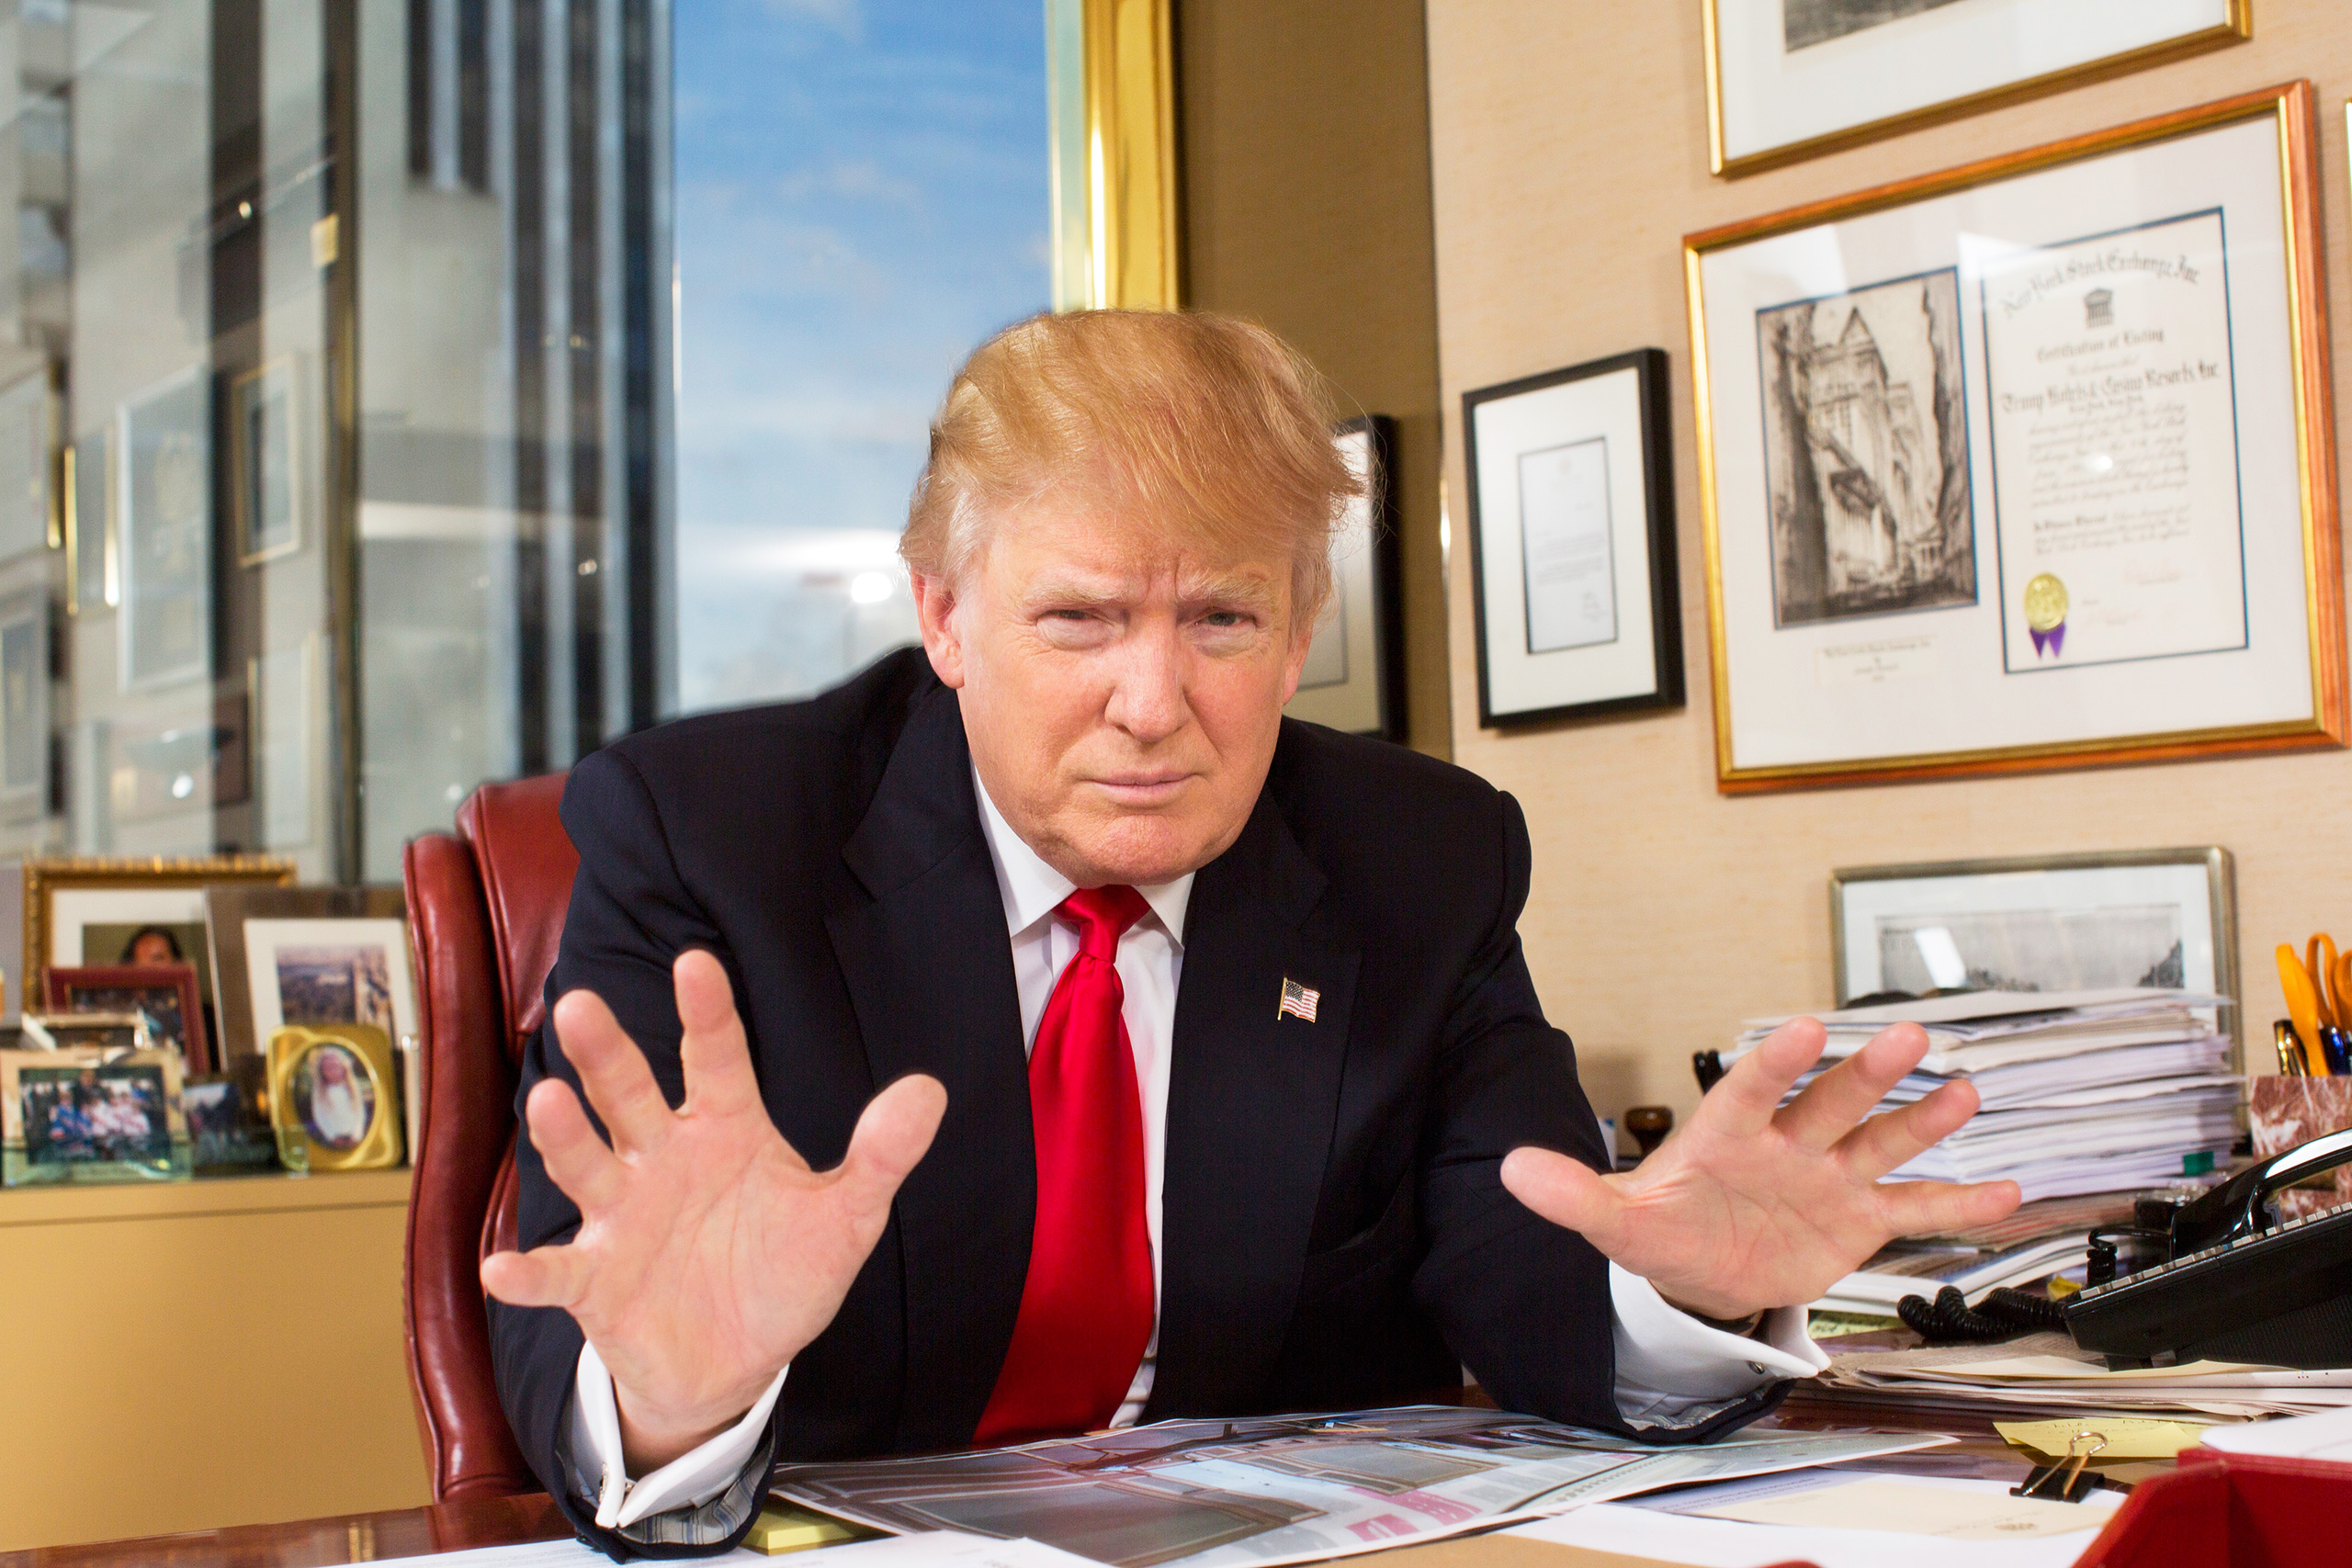 Donald trump photographed in his office at Trump Tower in New York City on July 11, 2016.From  What a President Needs to Know.  July 25, 2016 issue.